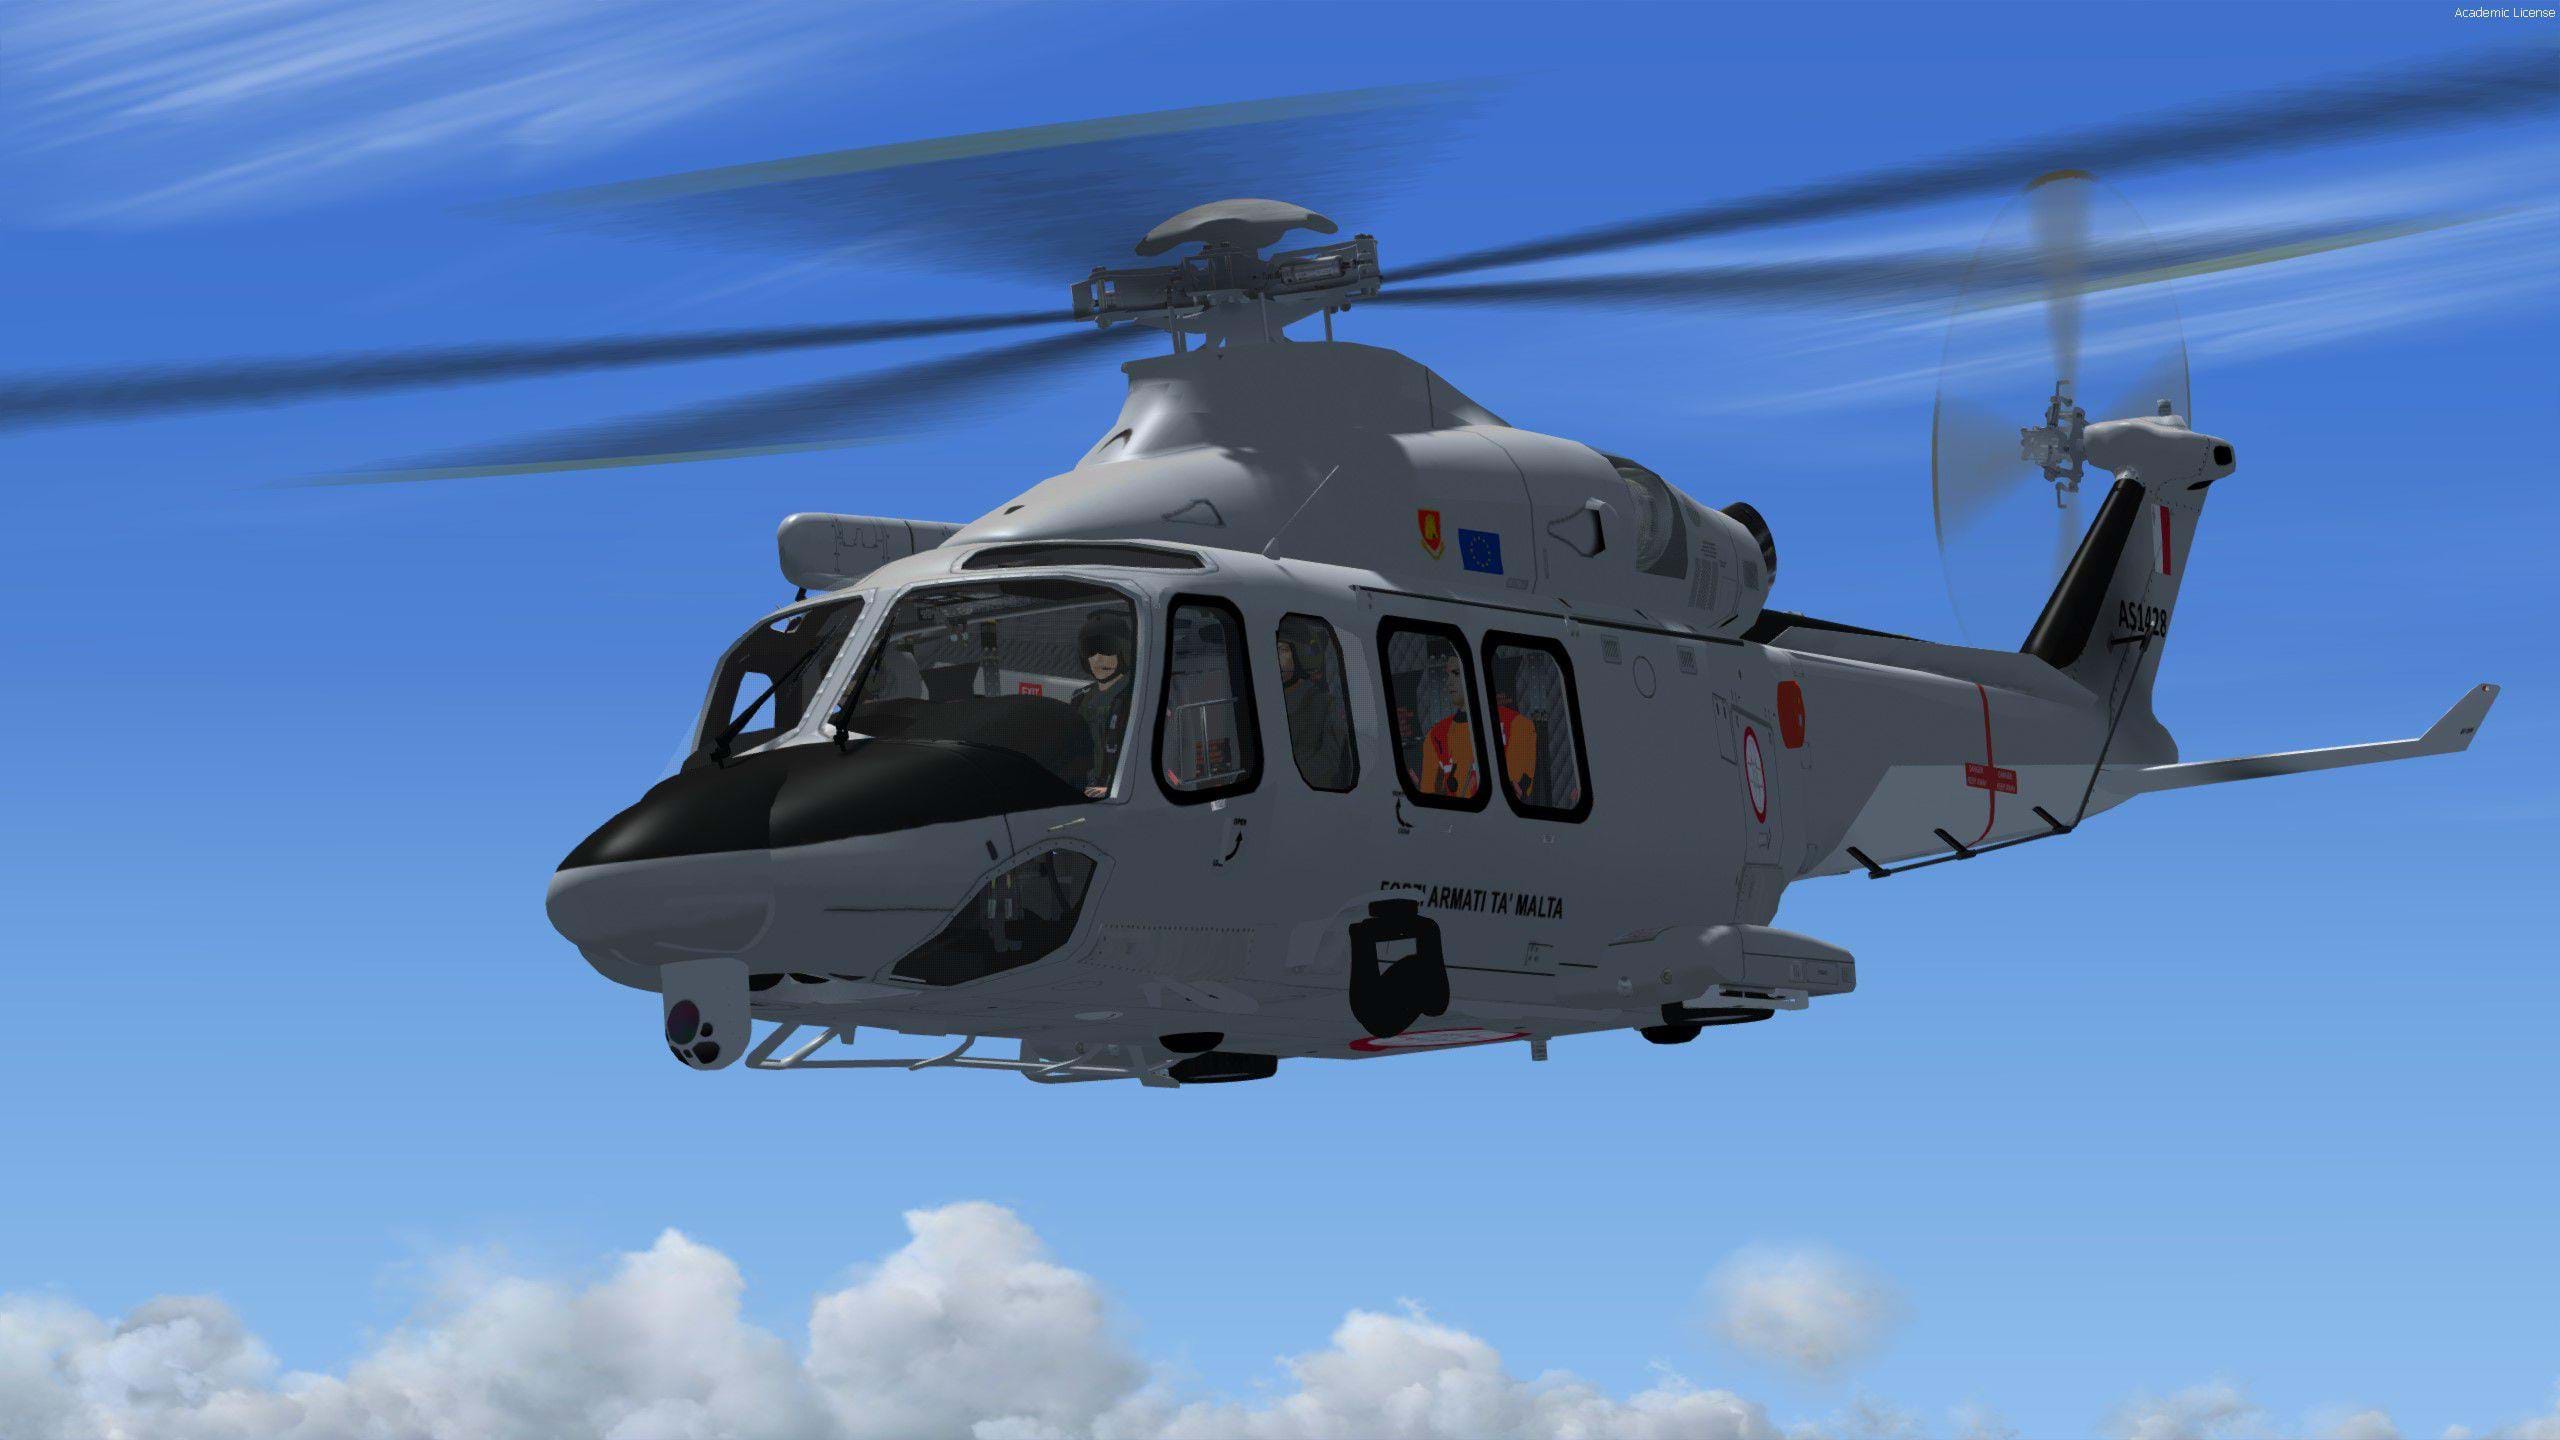 AW139 repaint - Armed Forces of Malta, Border Control and SAR